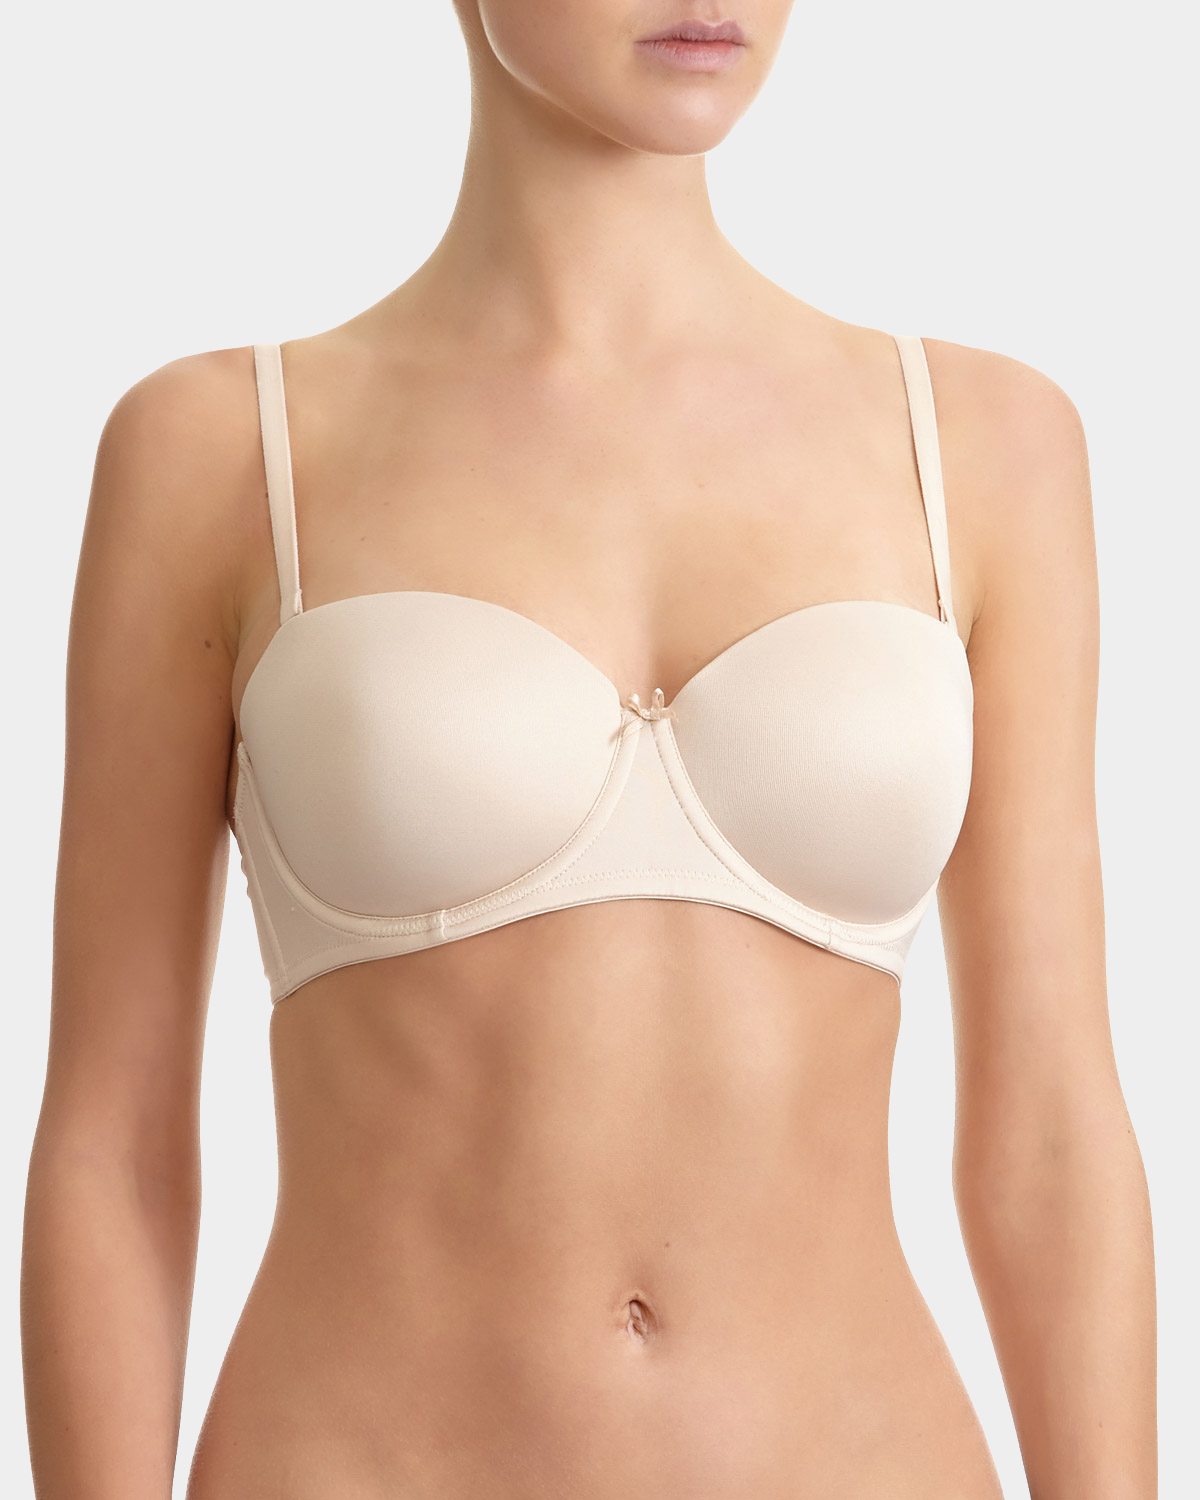 How to Style a Multiway Bra